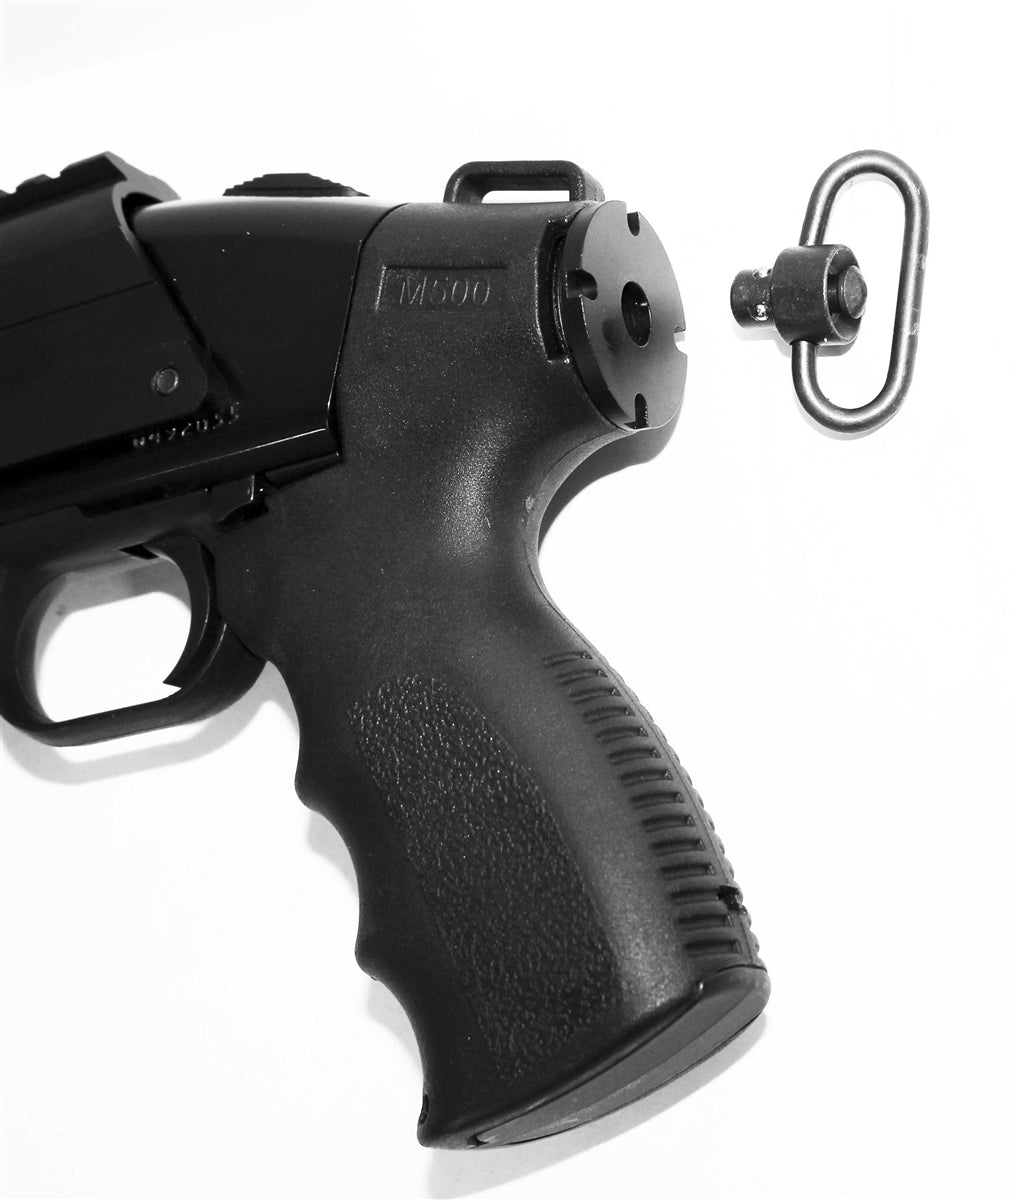 Trinity Swing Swivel End Cap For Mossberg 500 Grip Aluminum Black Hunting Tactical Accessory.